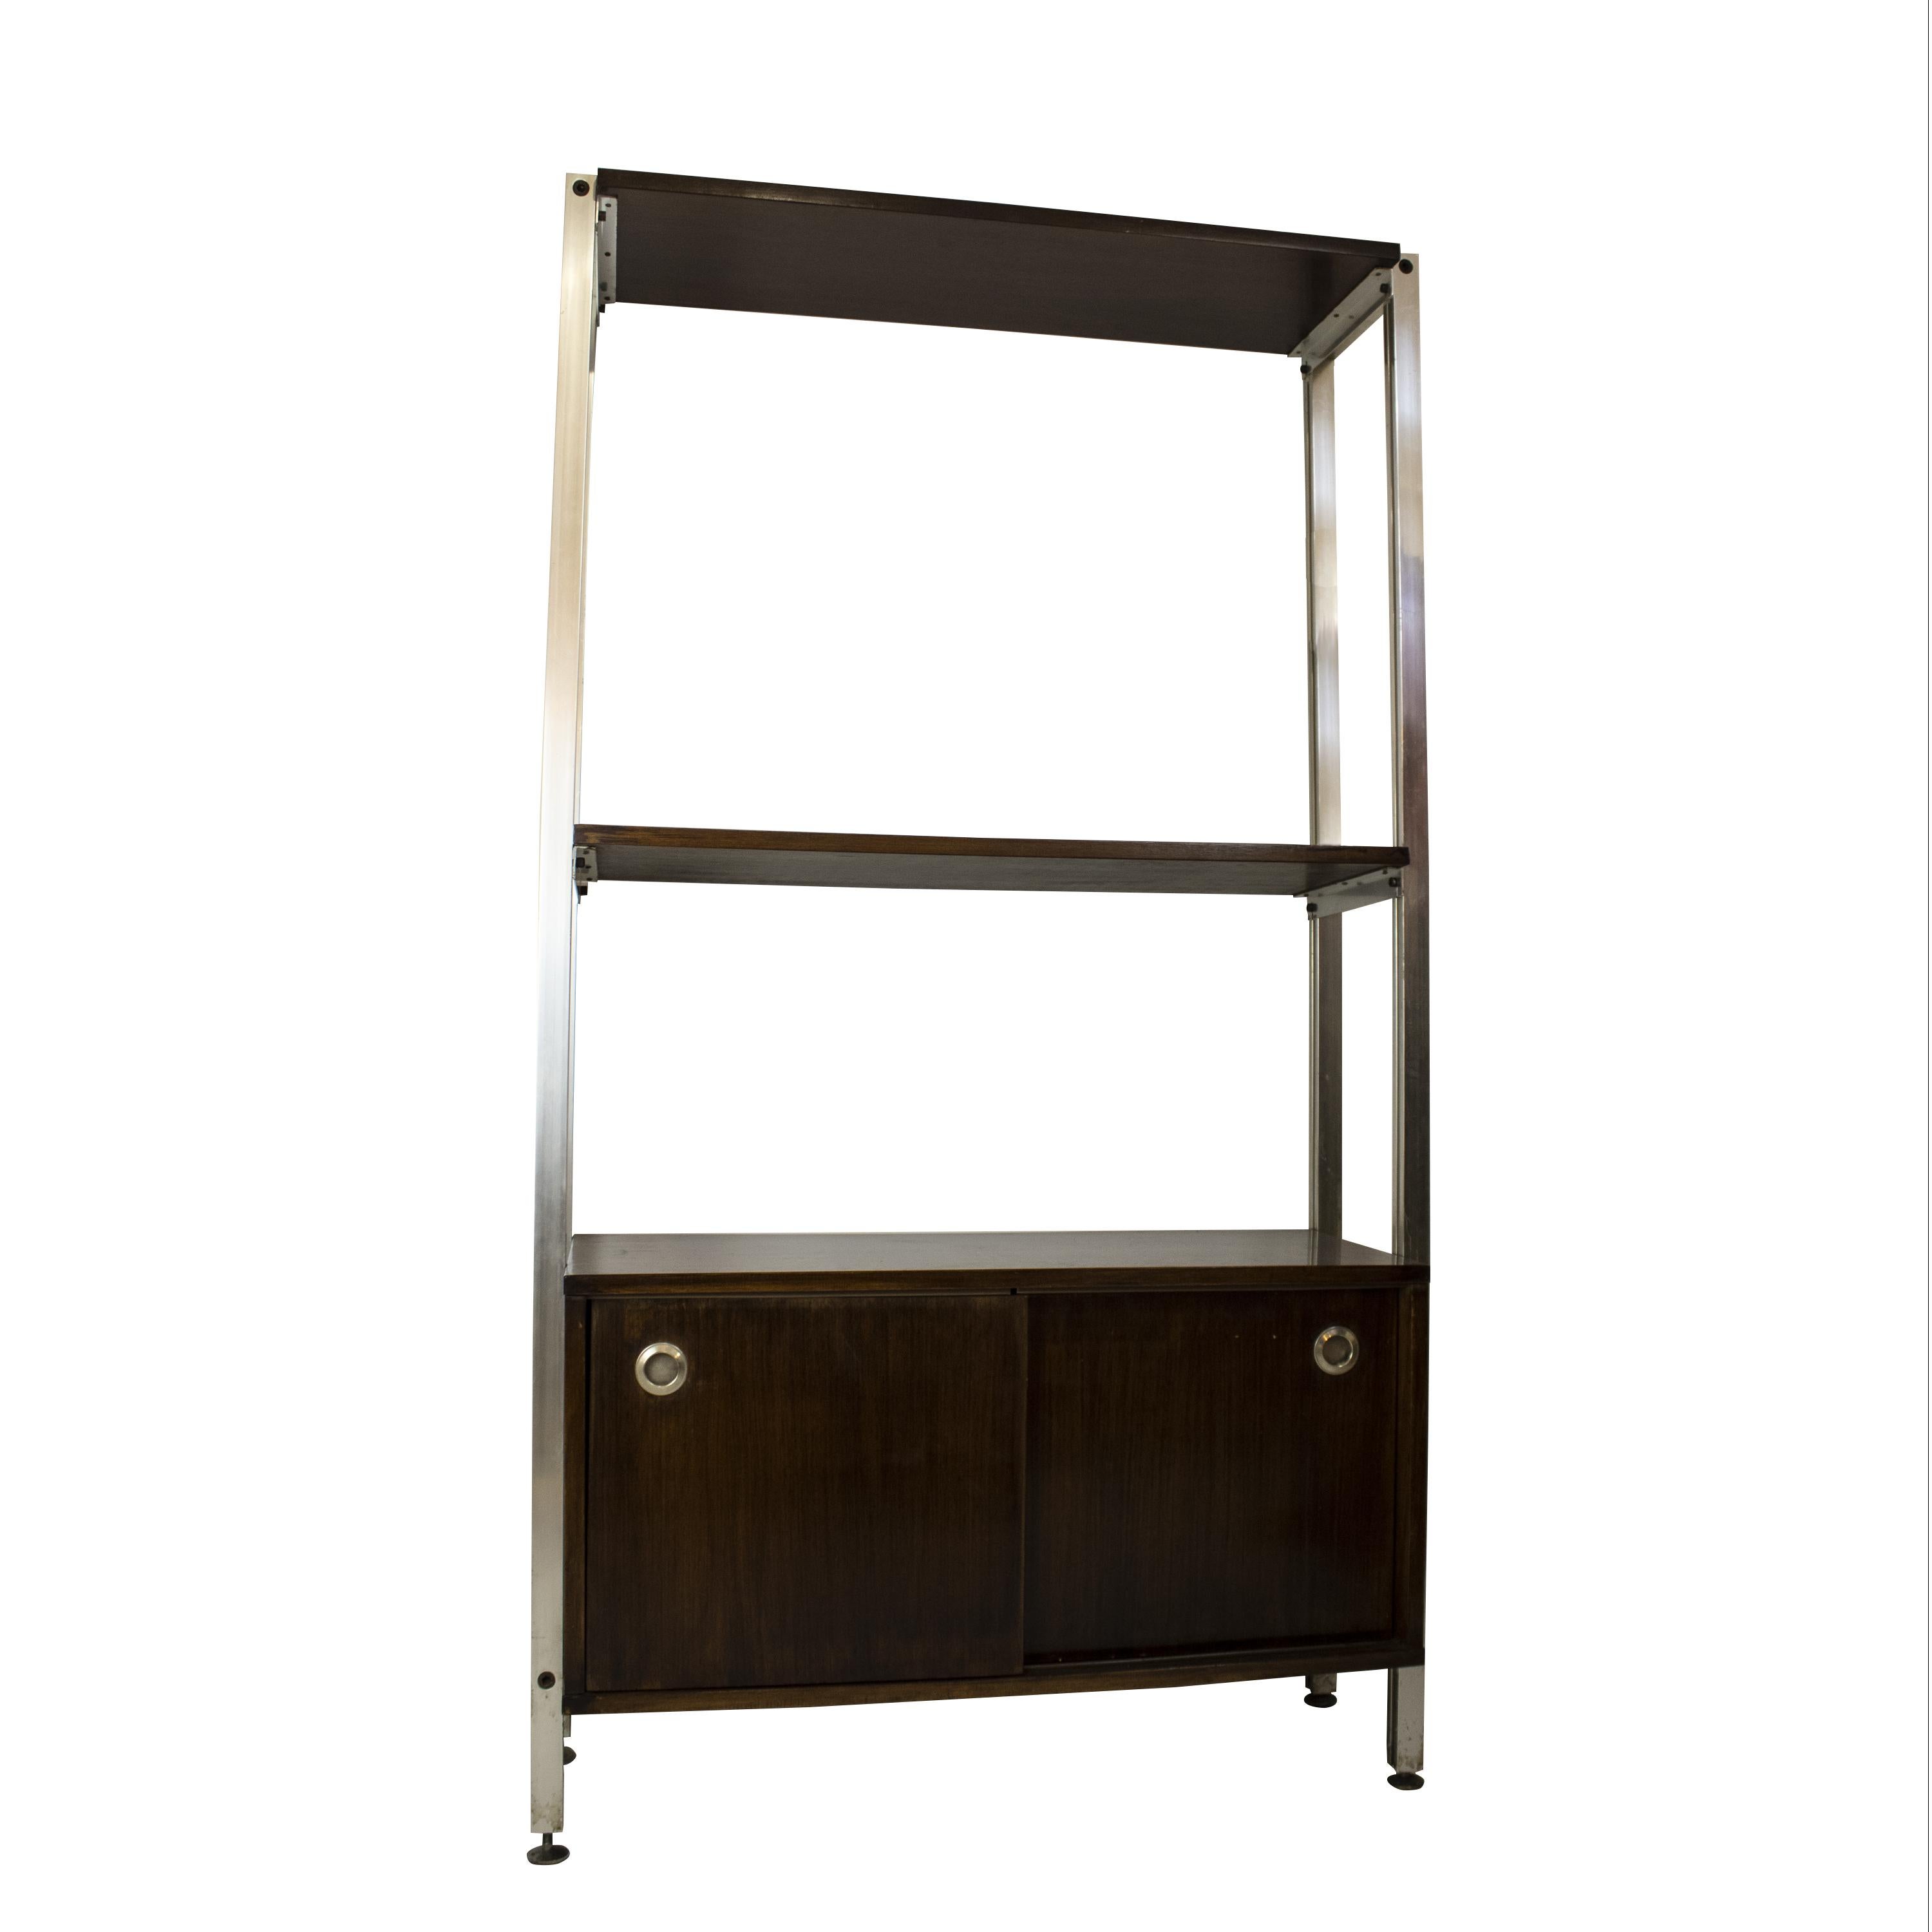 Italian office shelf unit edited by ICF Padova in the 1970s. It consists of steel frame structure with teak shelves and one storage module with sliding doors.